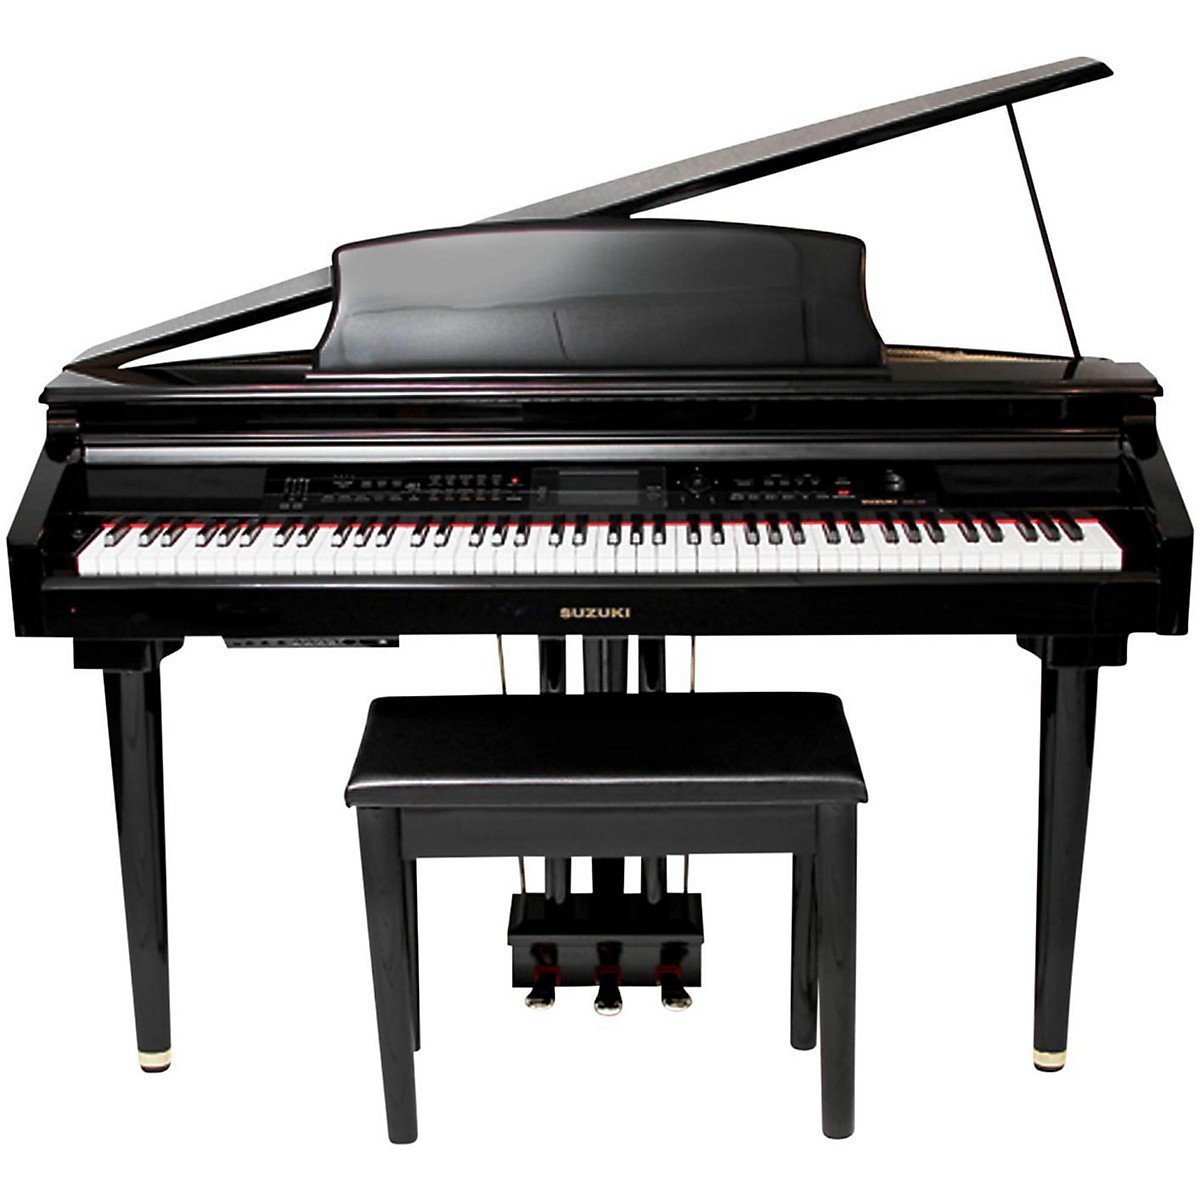 Which is the Best Digital Grand Piano